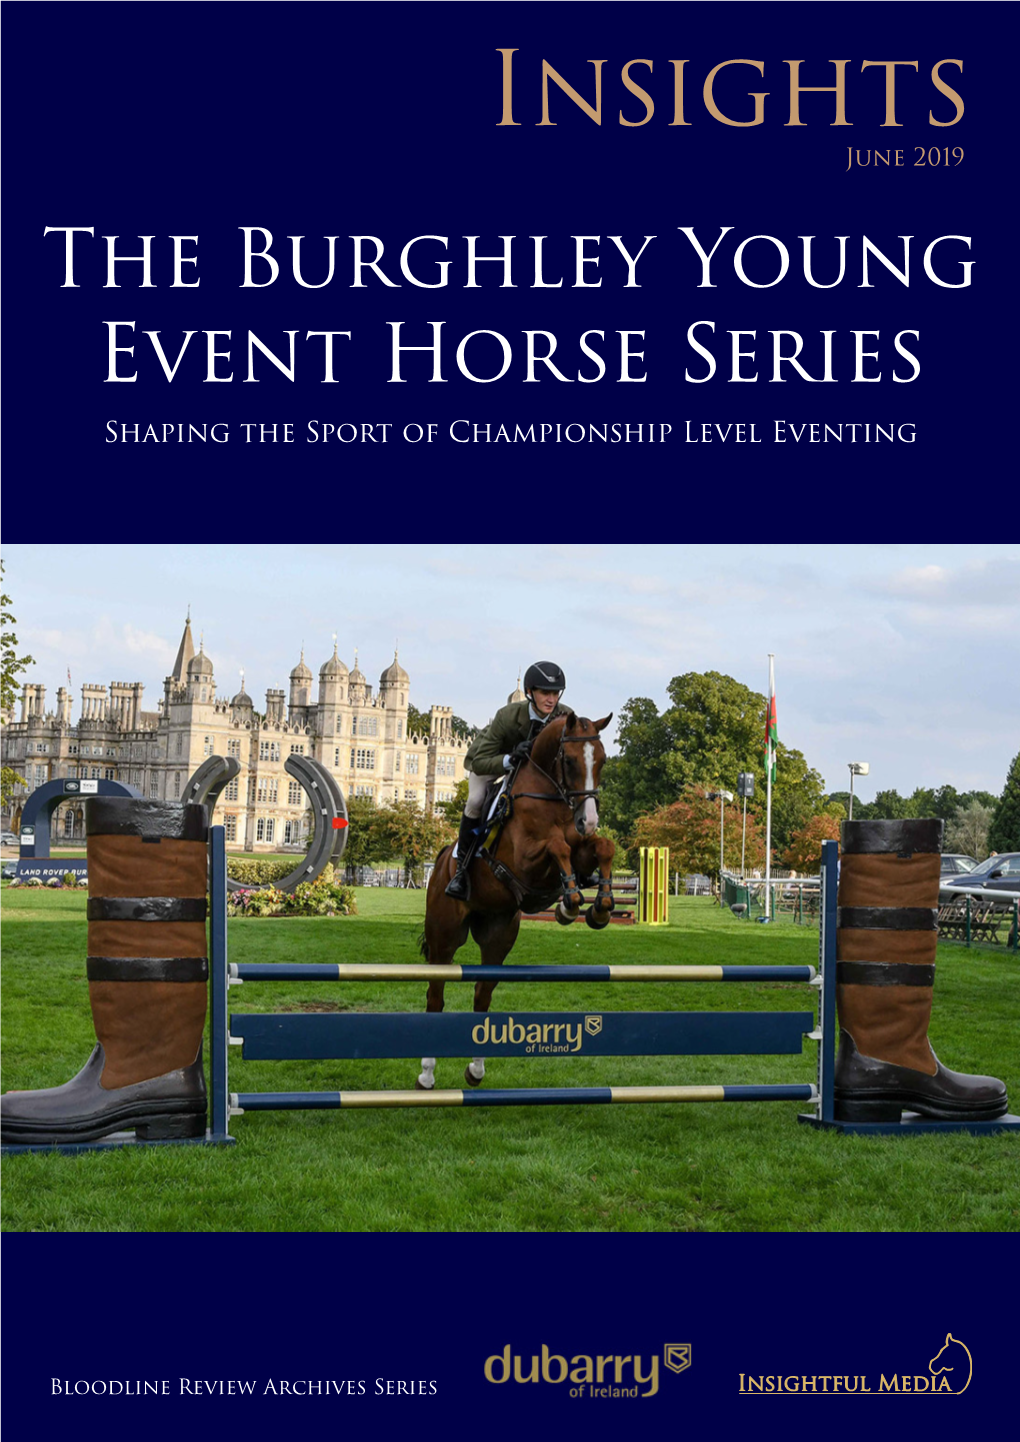 Insights June 2019 the Burghley Young Event Horse Series Shaping the Sport of Championship Level Eventing